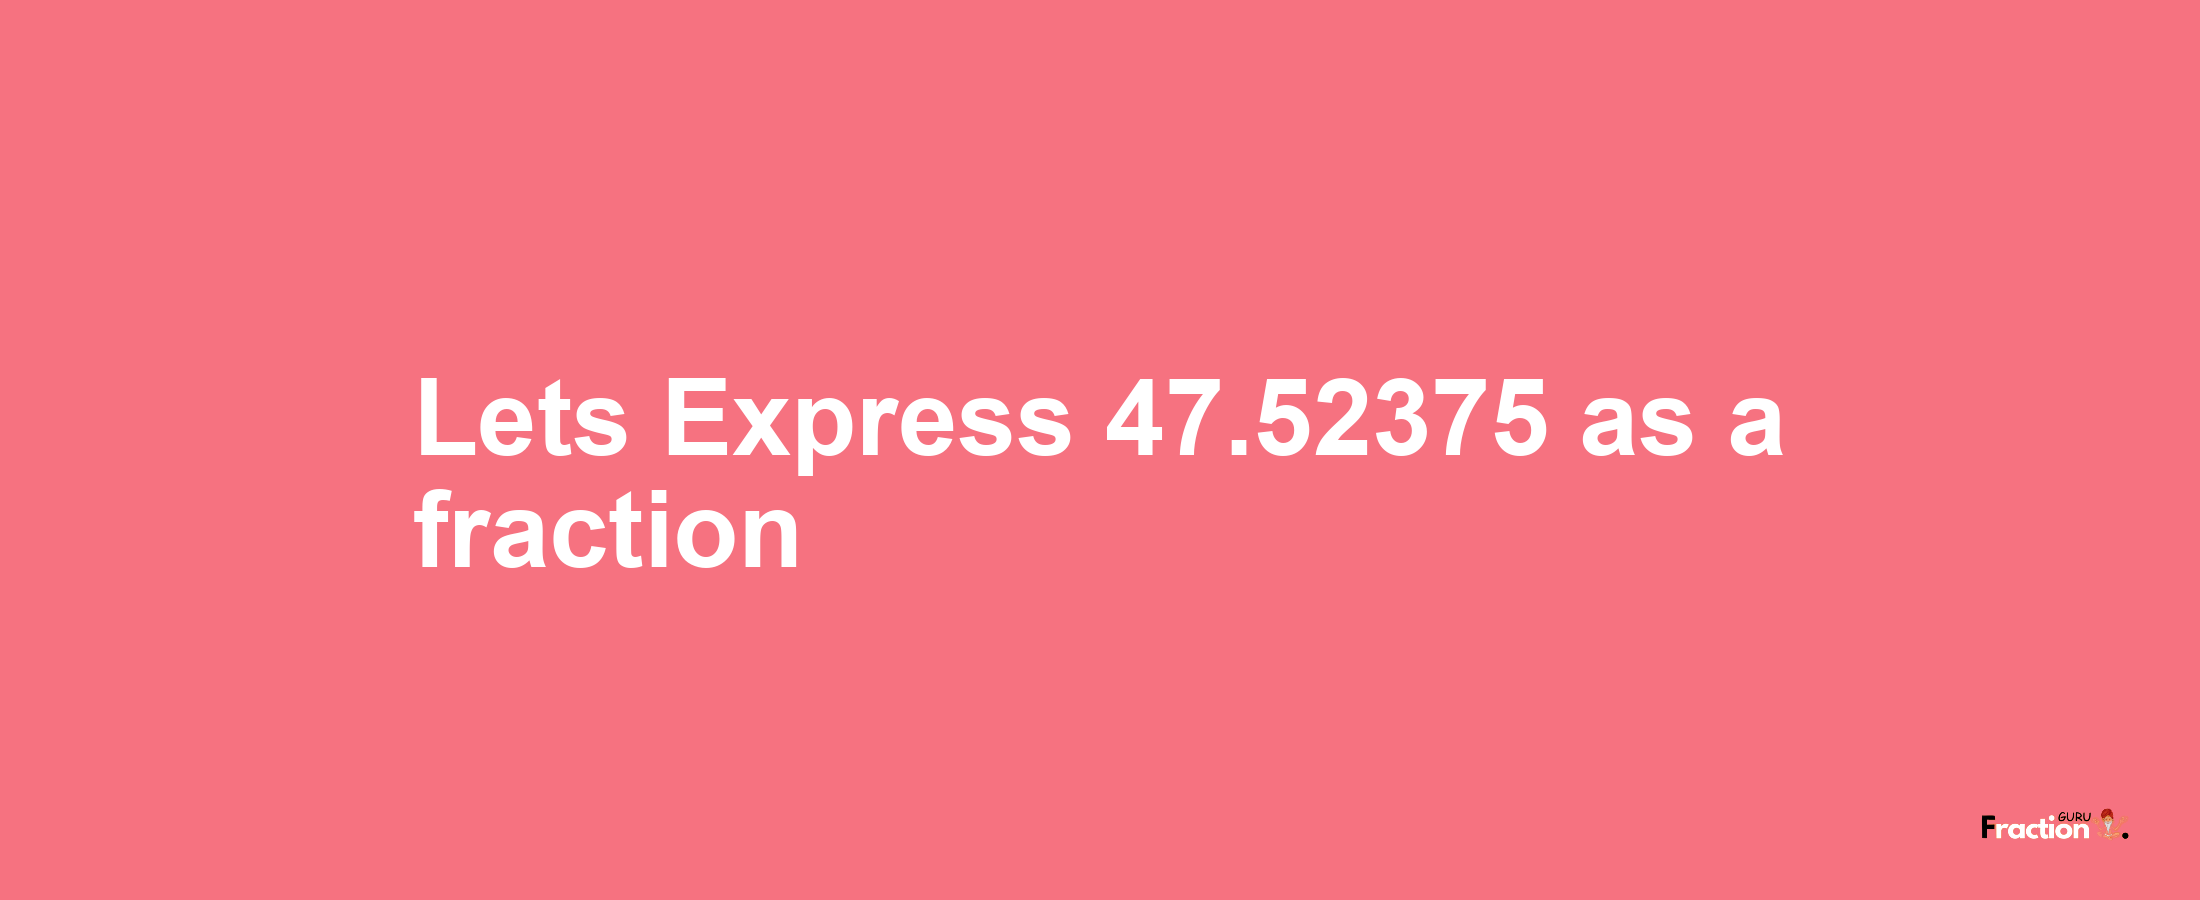 Lets Express 47.52375 as afraction